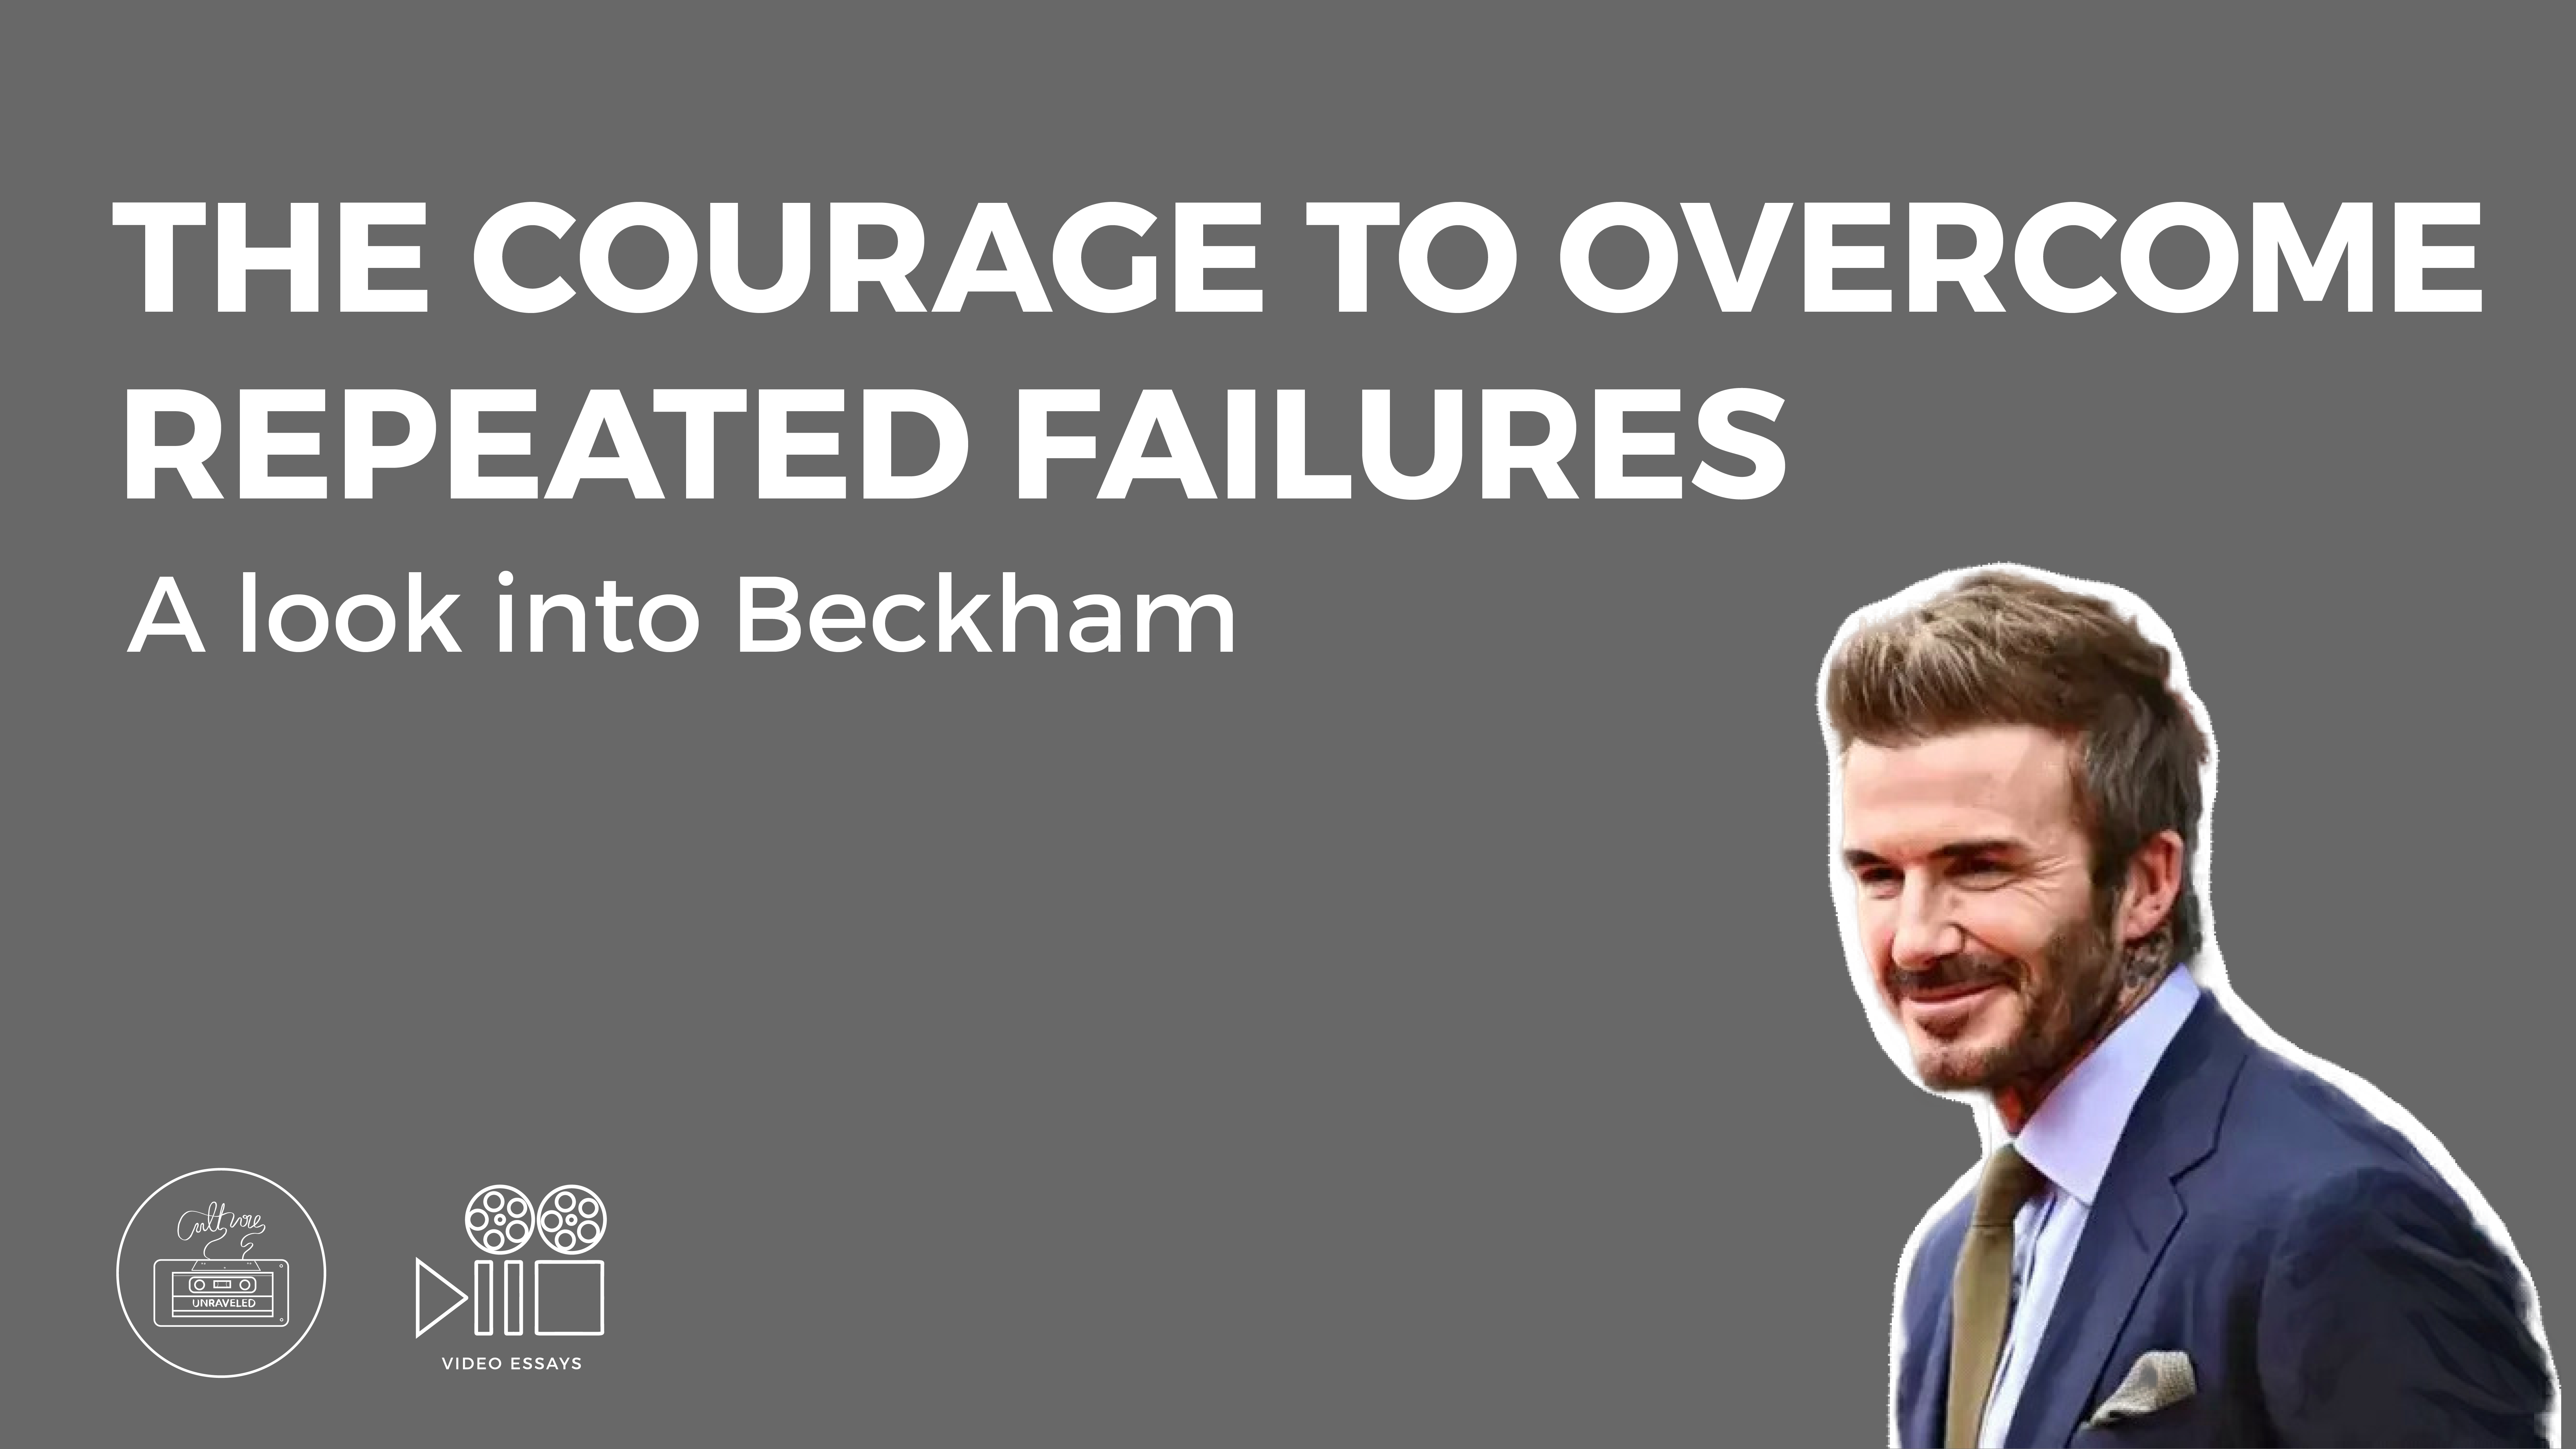 The Courage to Overcome Repeated Failures. A Look into Beckham